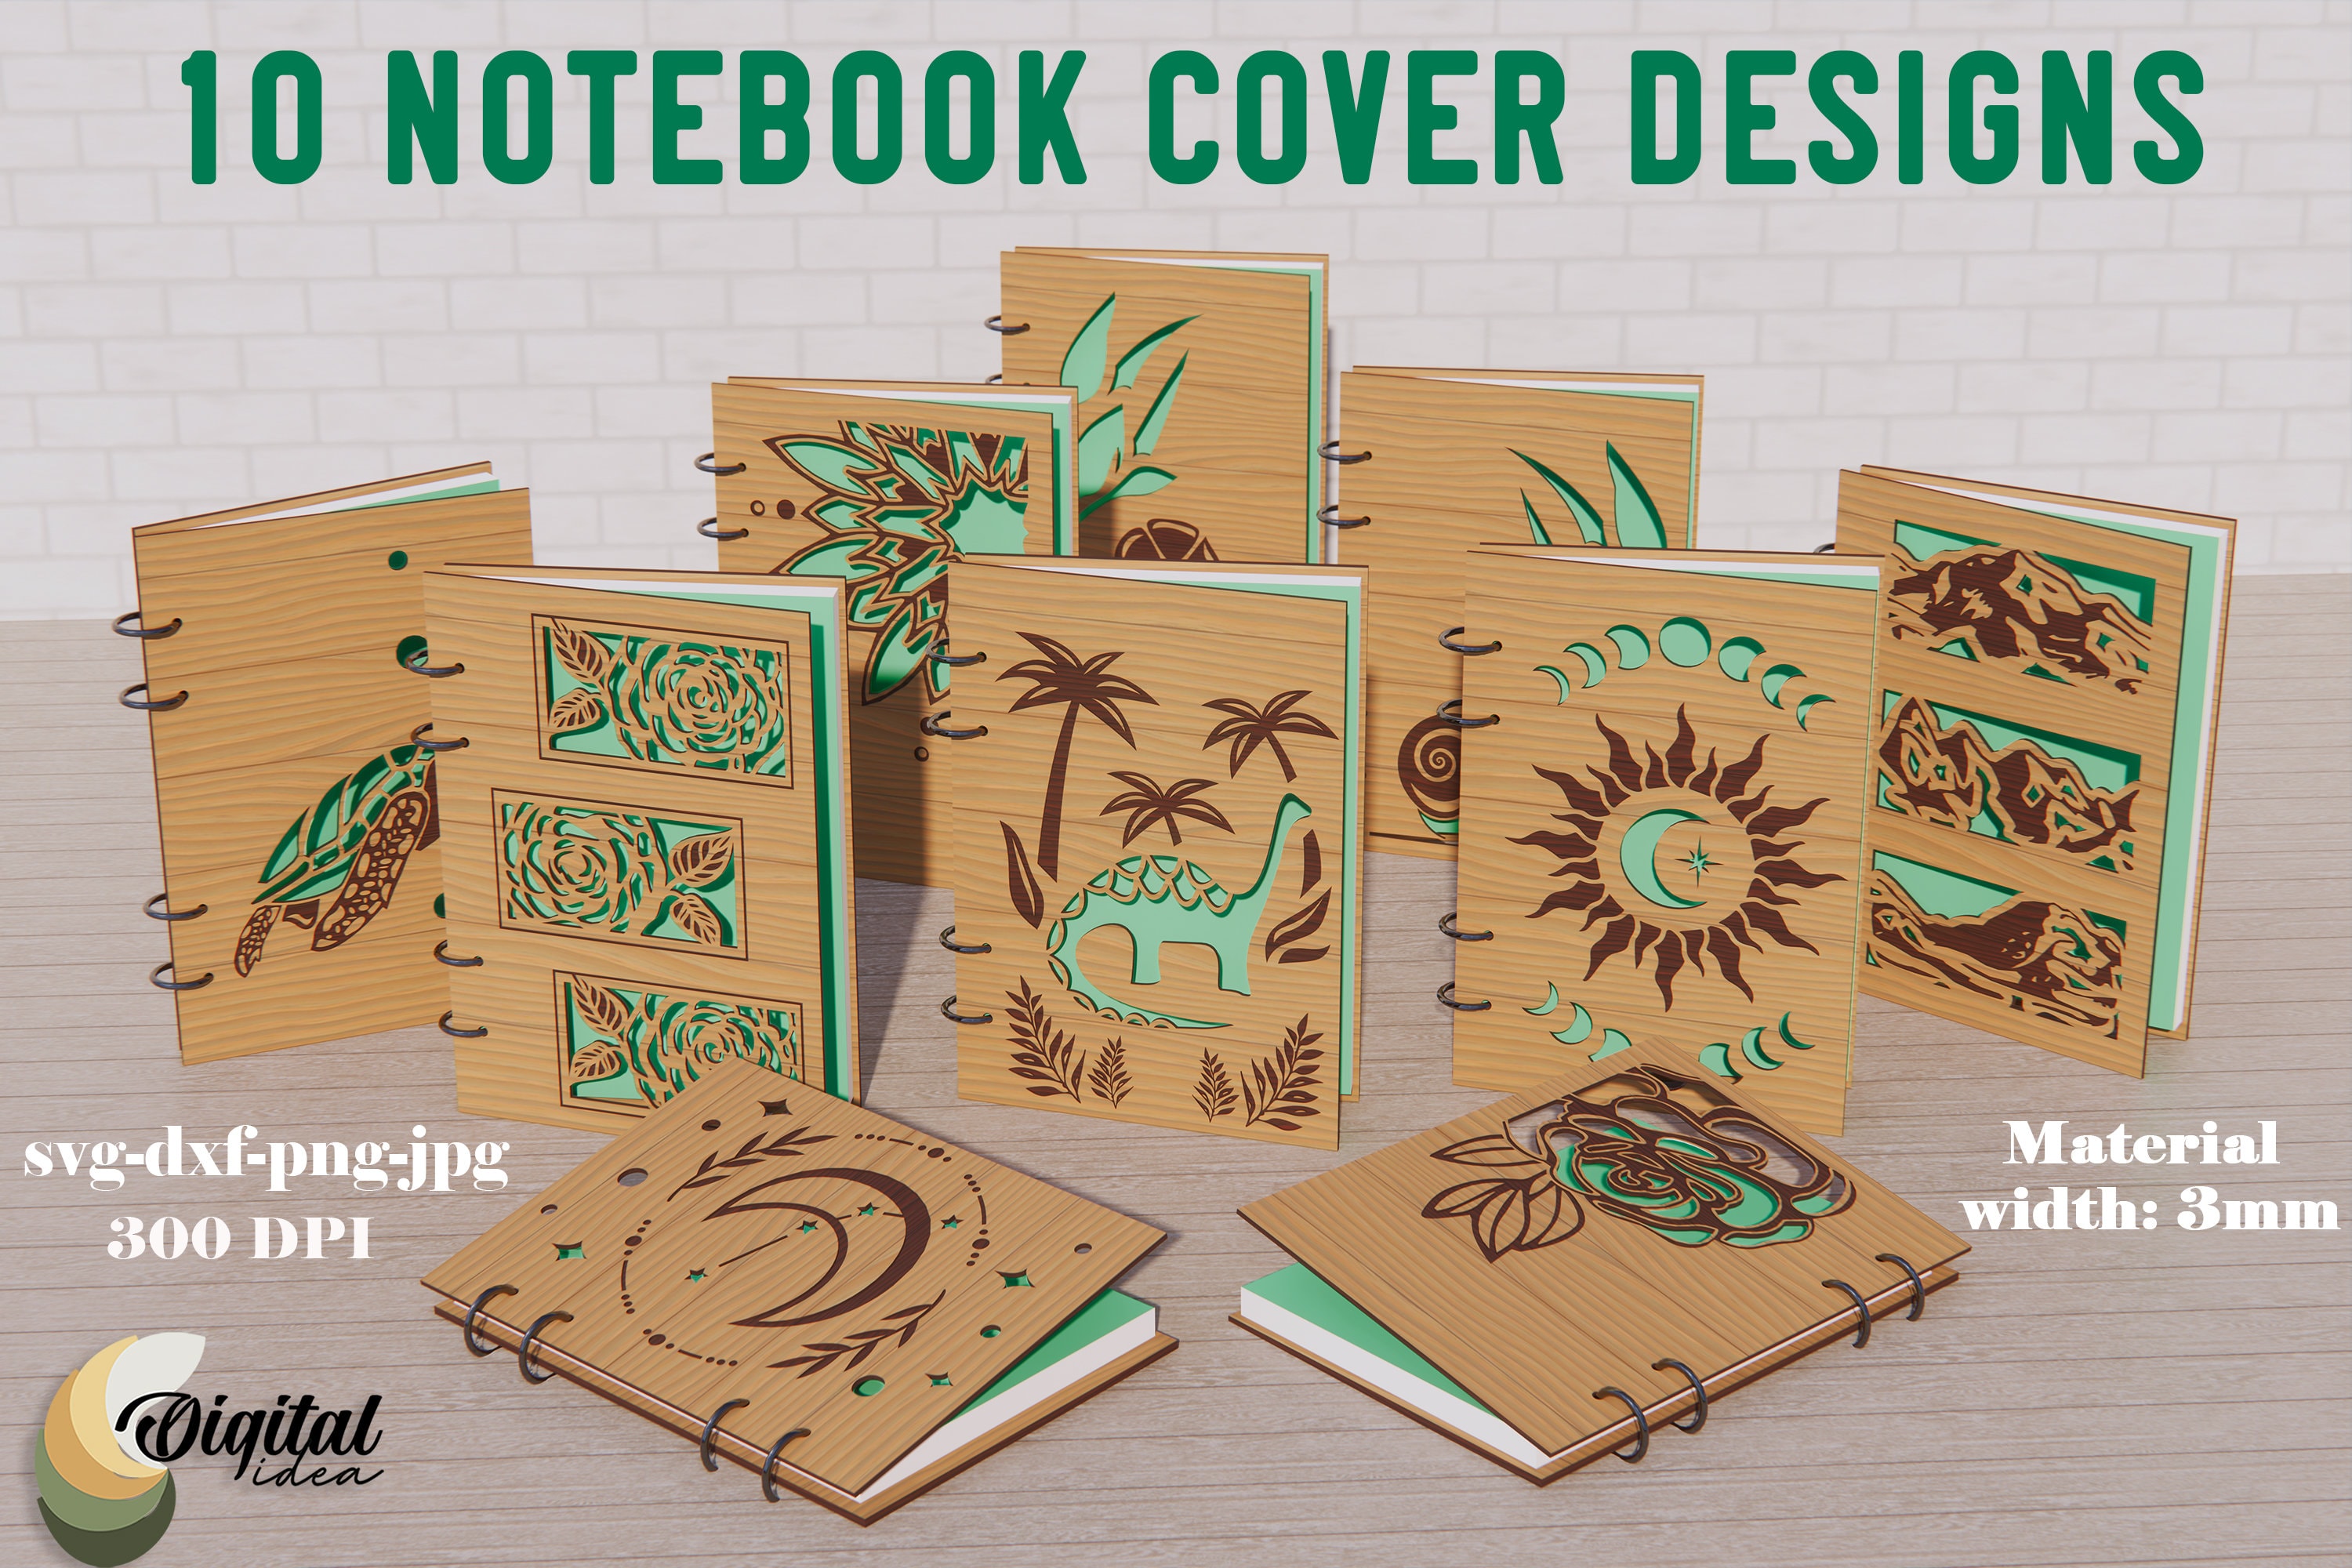 316,489 Notebook Cover Design Images, Stock Photos, 3D objects, & Vectors